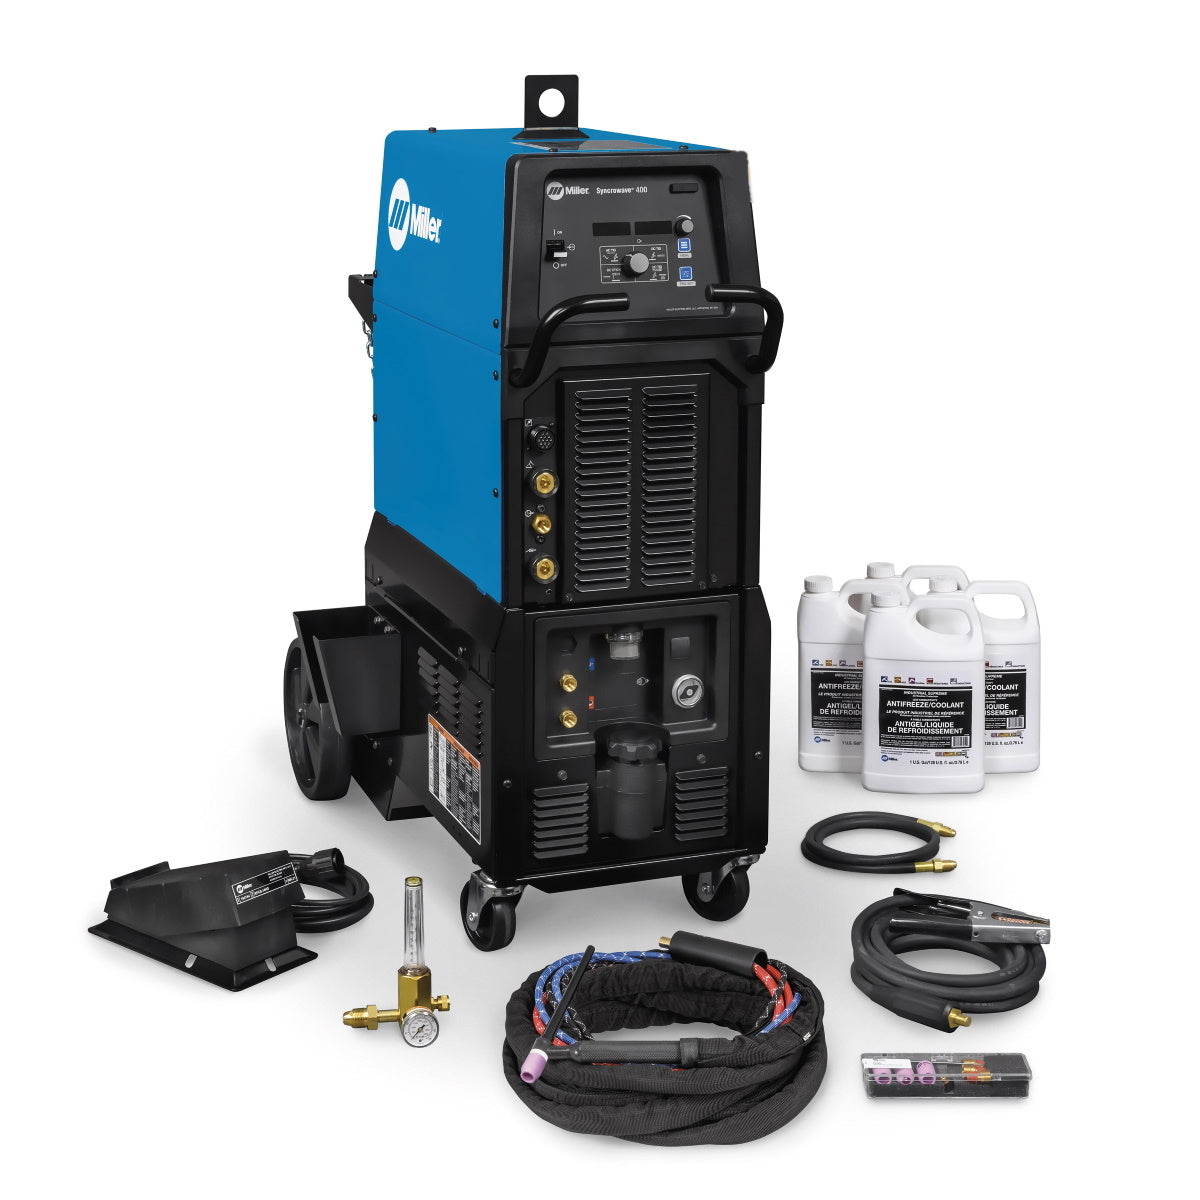 Miller Syncrowave 400 AC/DC TIG and Stick Welder Complete w/Wired Foot Control (951831)